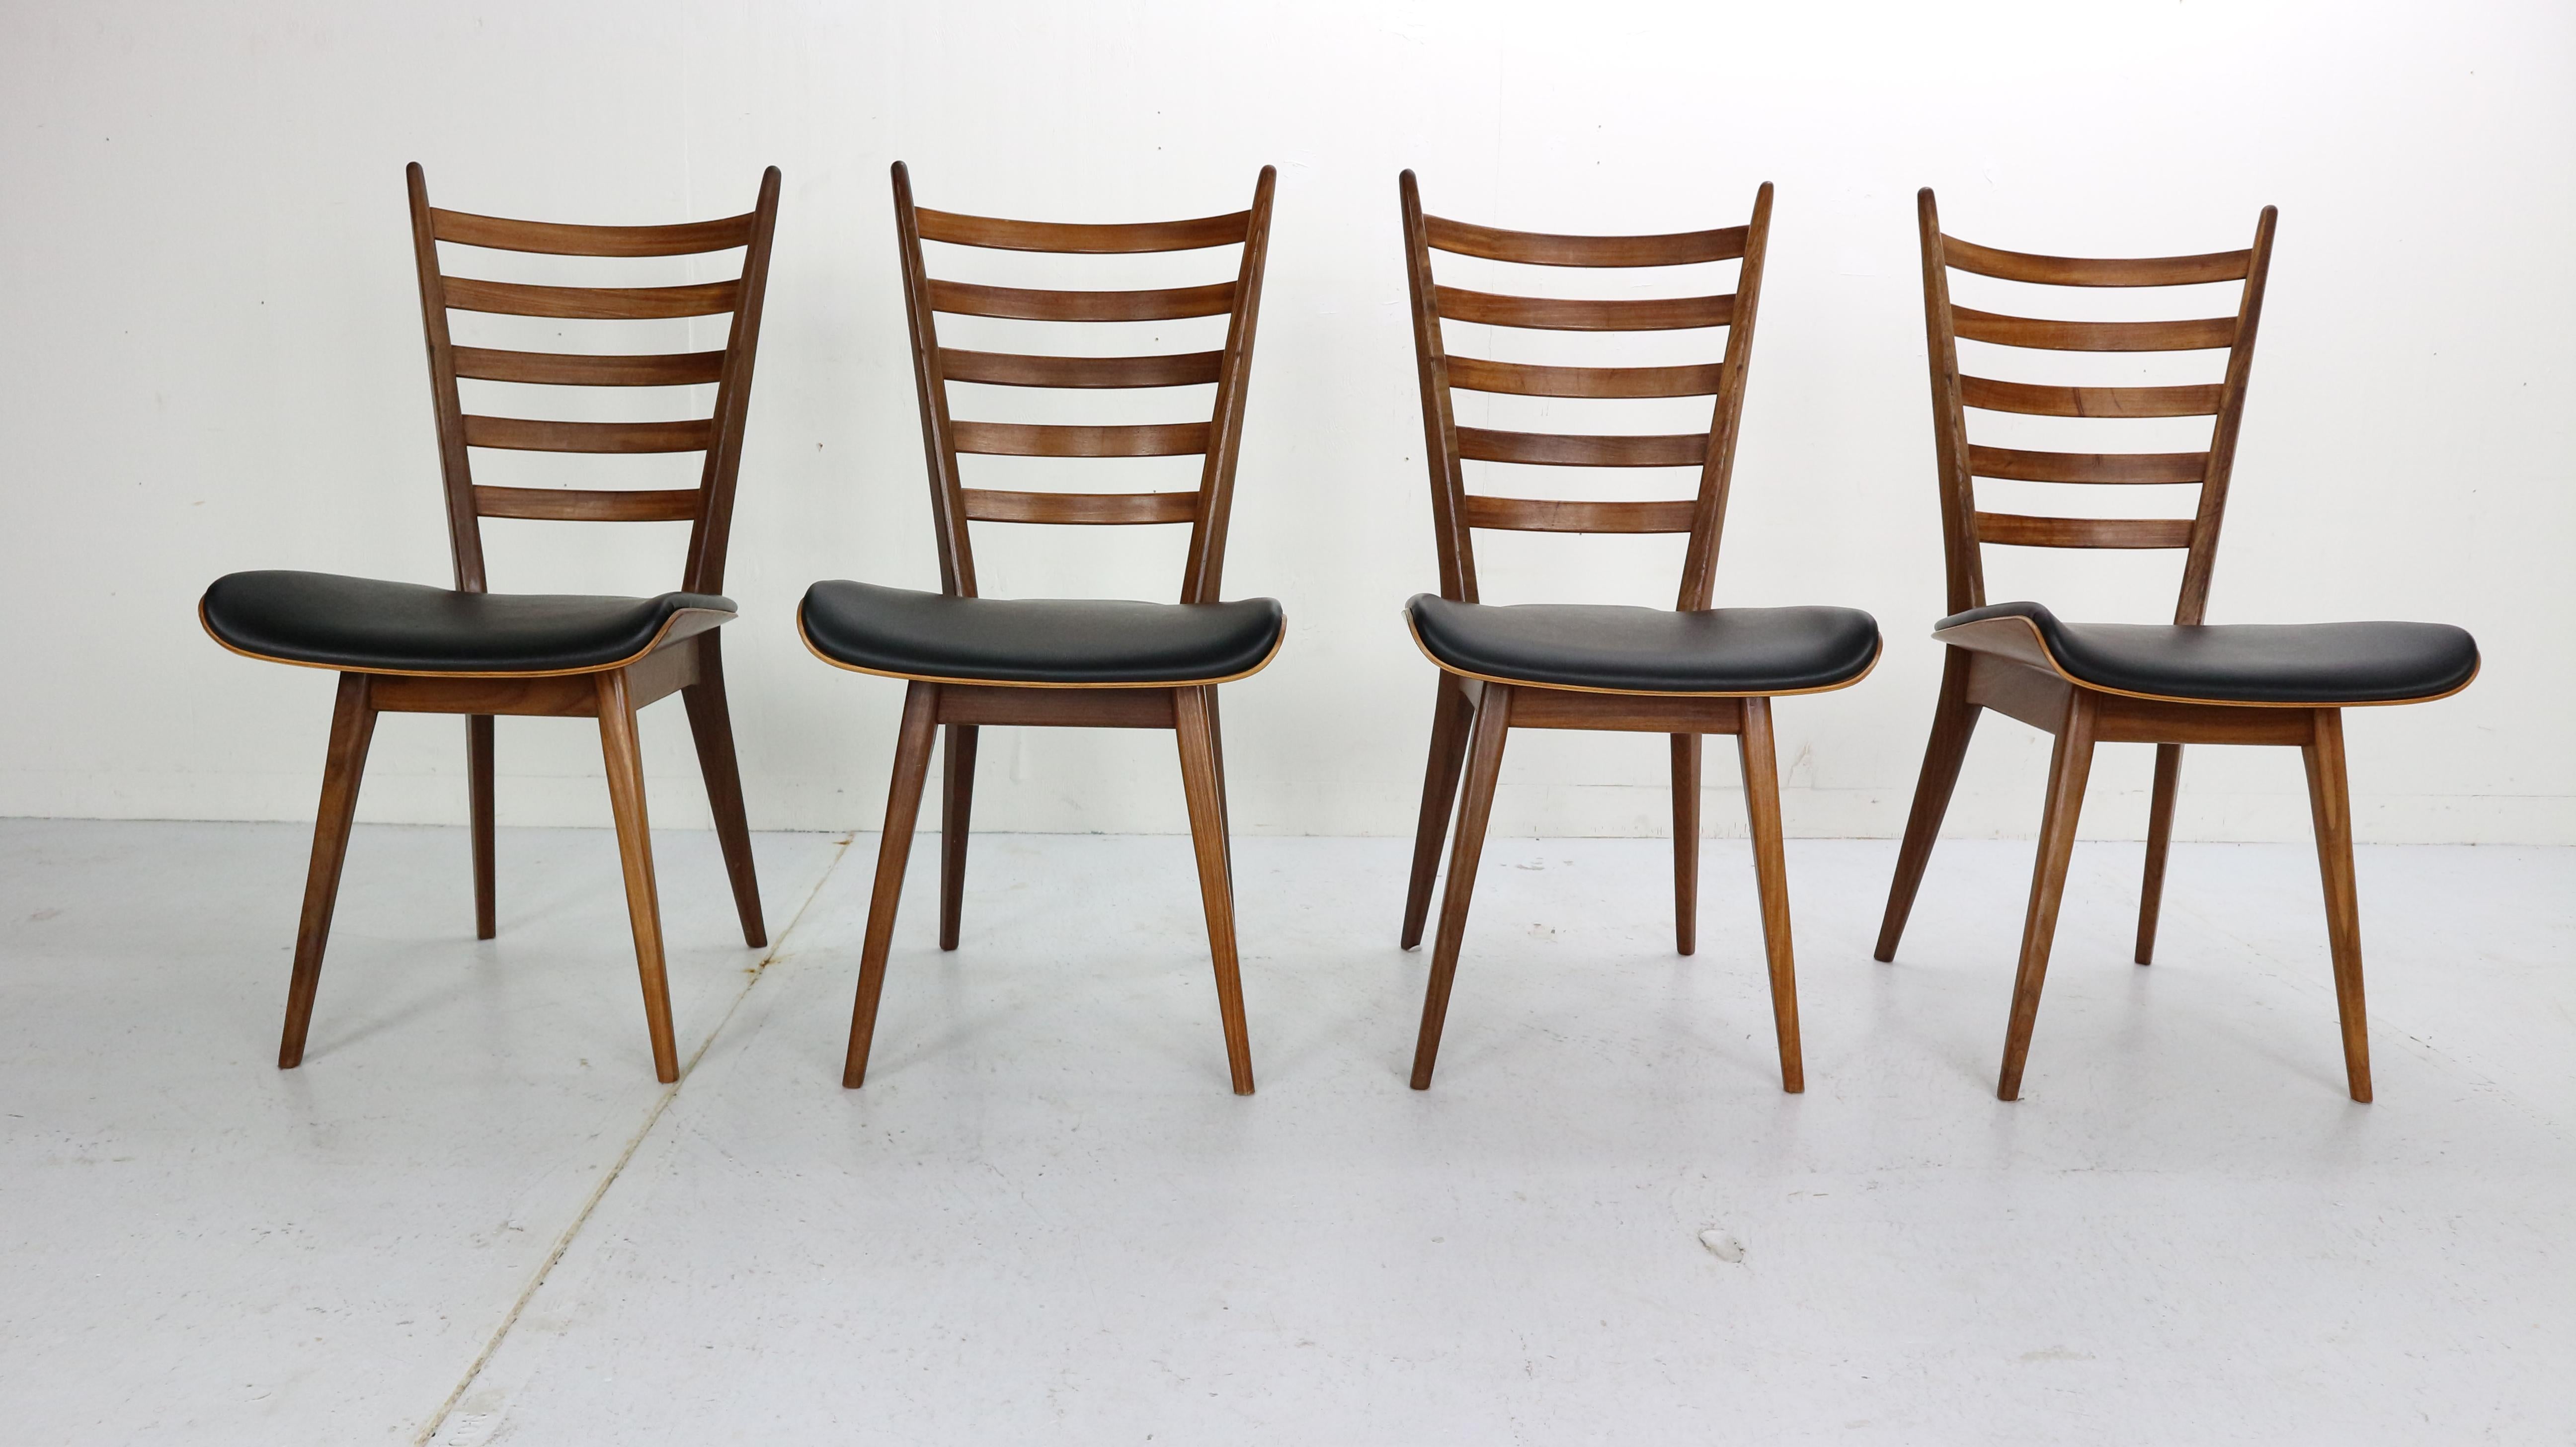 Dutch Set of 4 Dinning Room Chairs by Cees Braakman for Pastoe, 1960s Netherlands